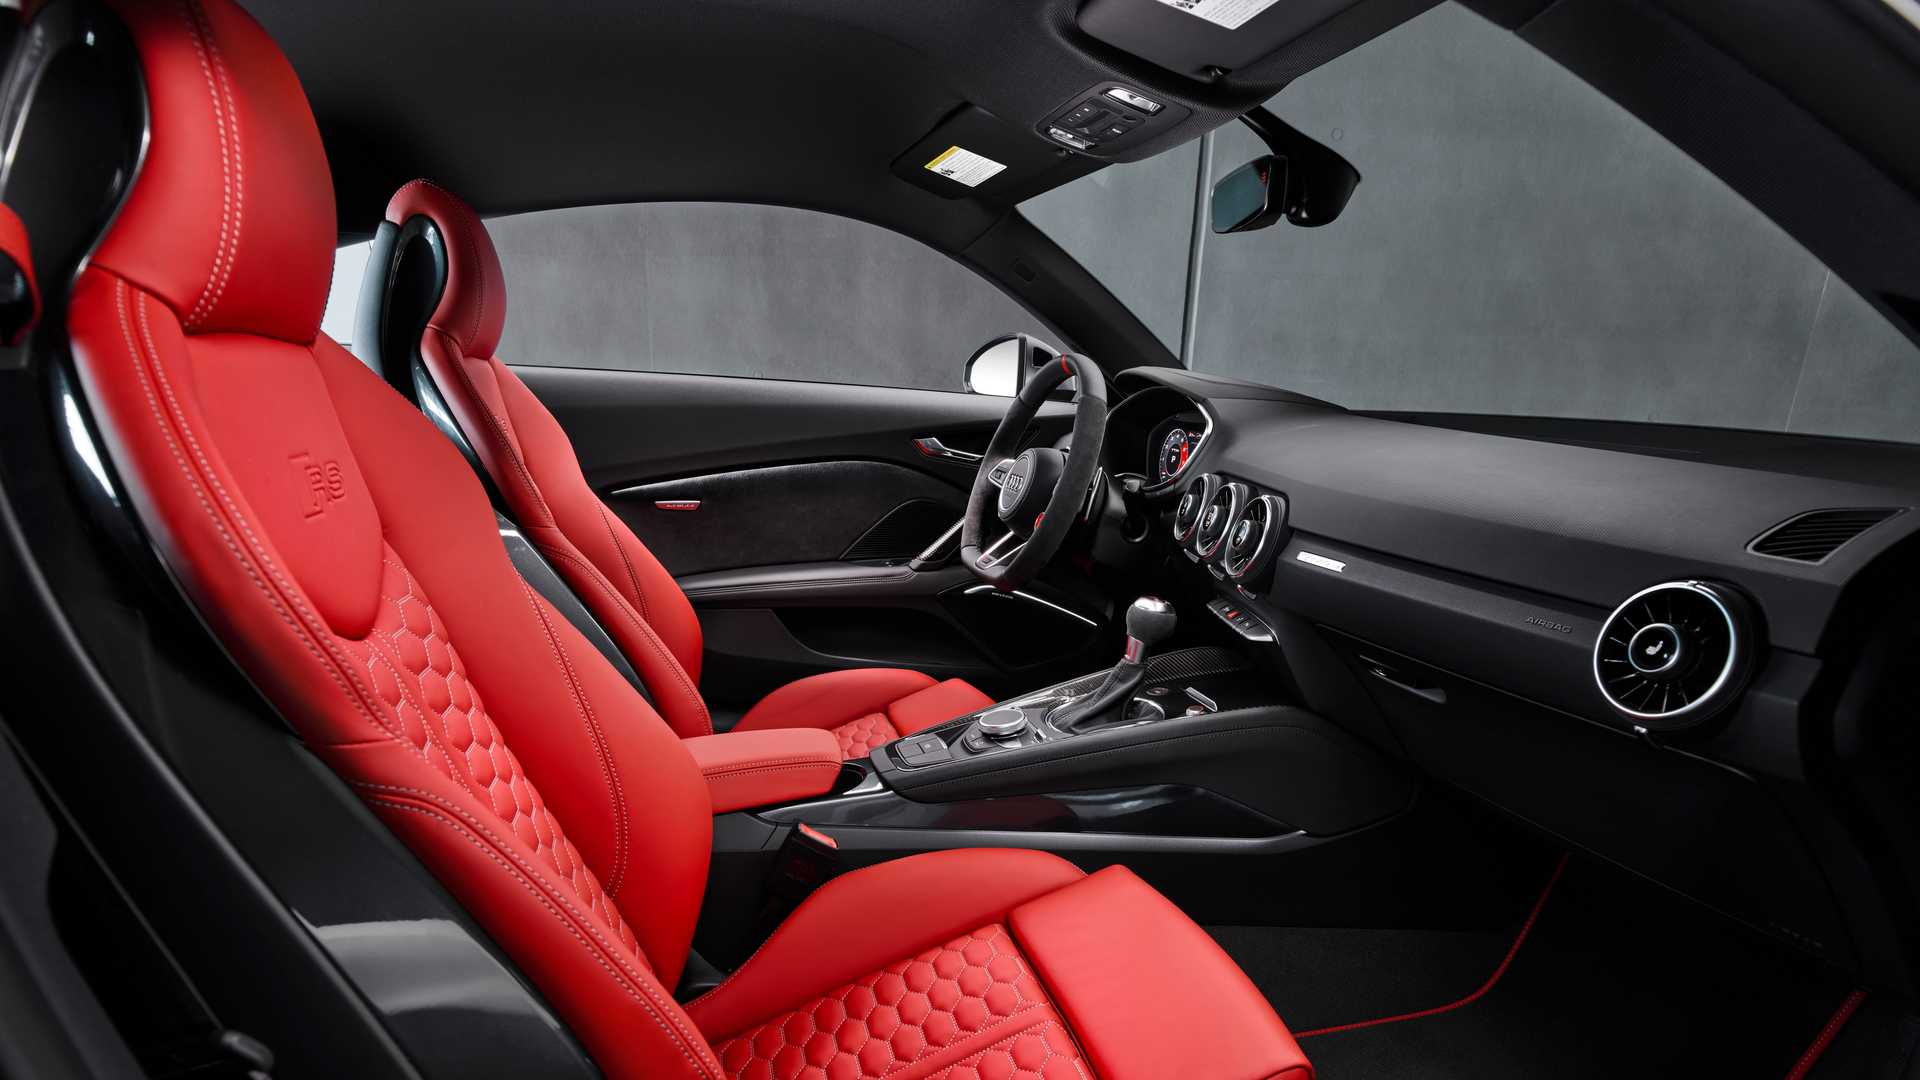 2022-audi-tt-rs-heritage-edition-stone-gray-metallic-with-crimson-red-leather-and-jet-gray-stitch3.jpeg